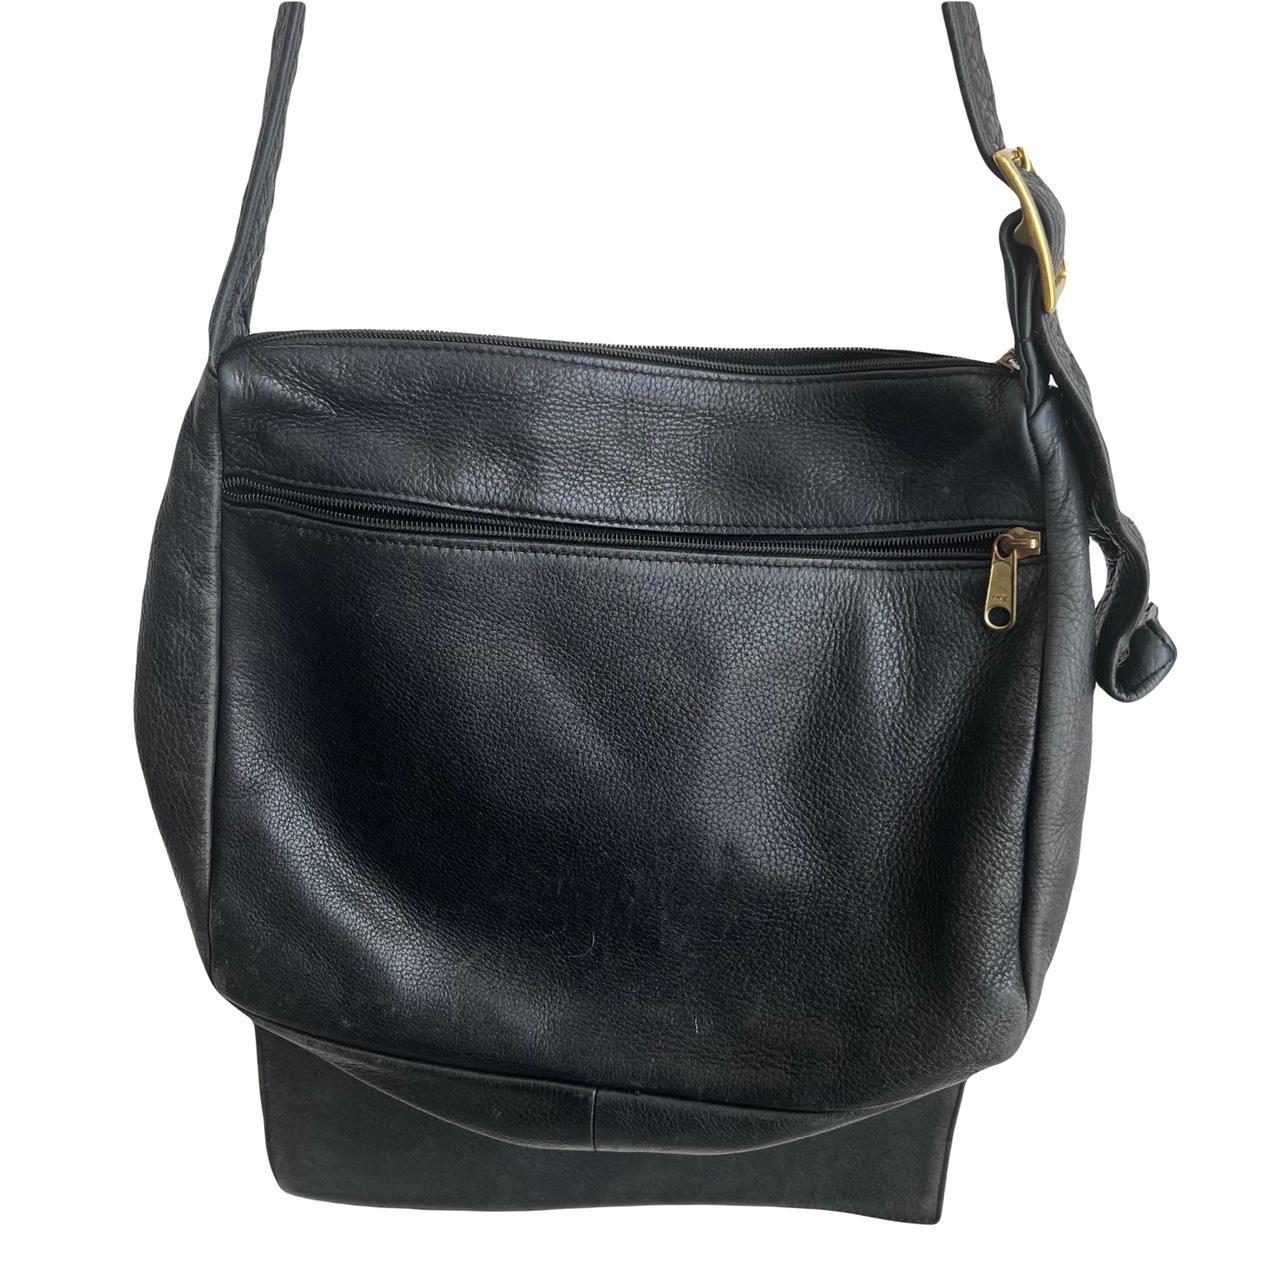 LIBAIRE luxurious soft leather bag  Soft leather bag, Leather bag, Bags